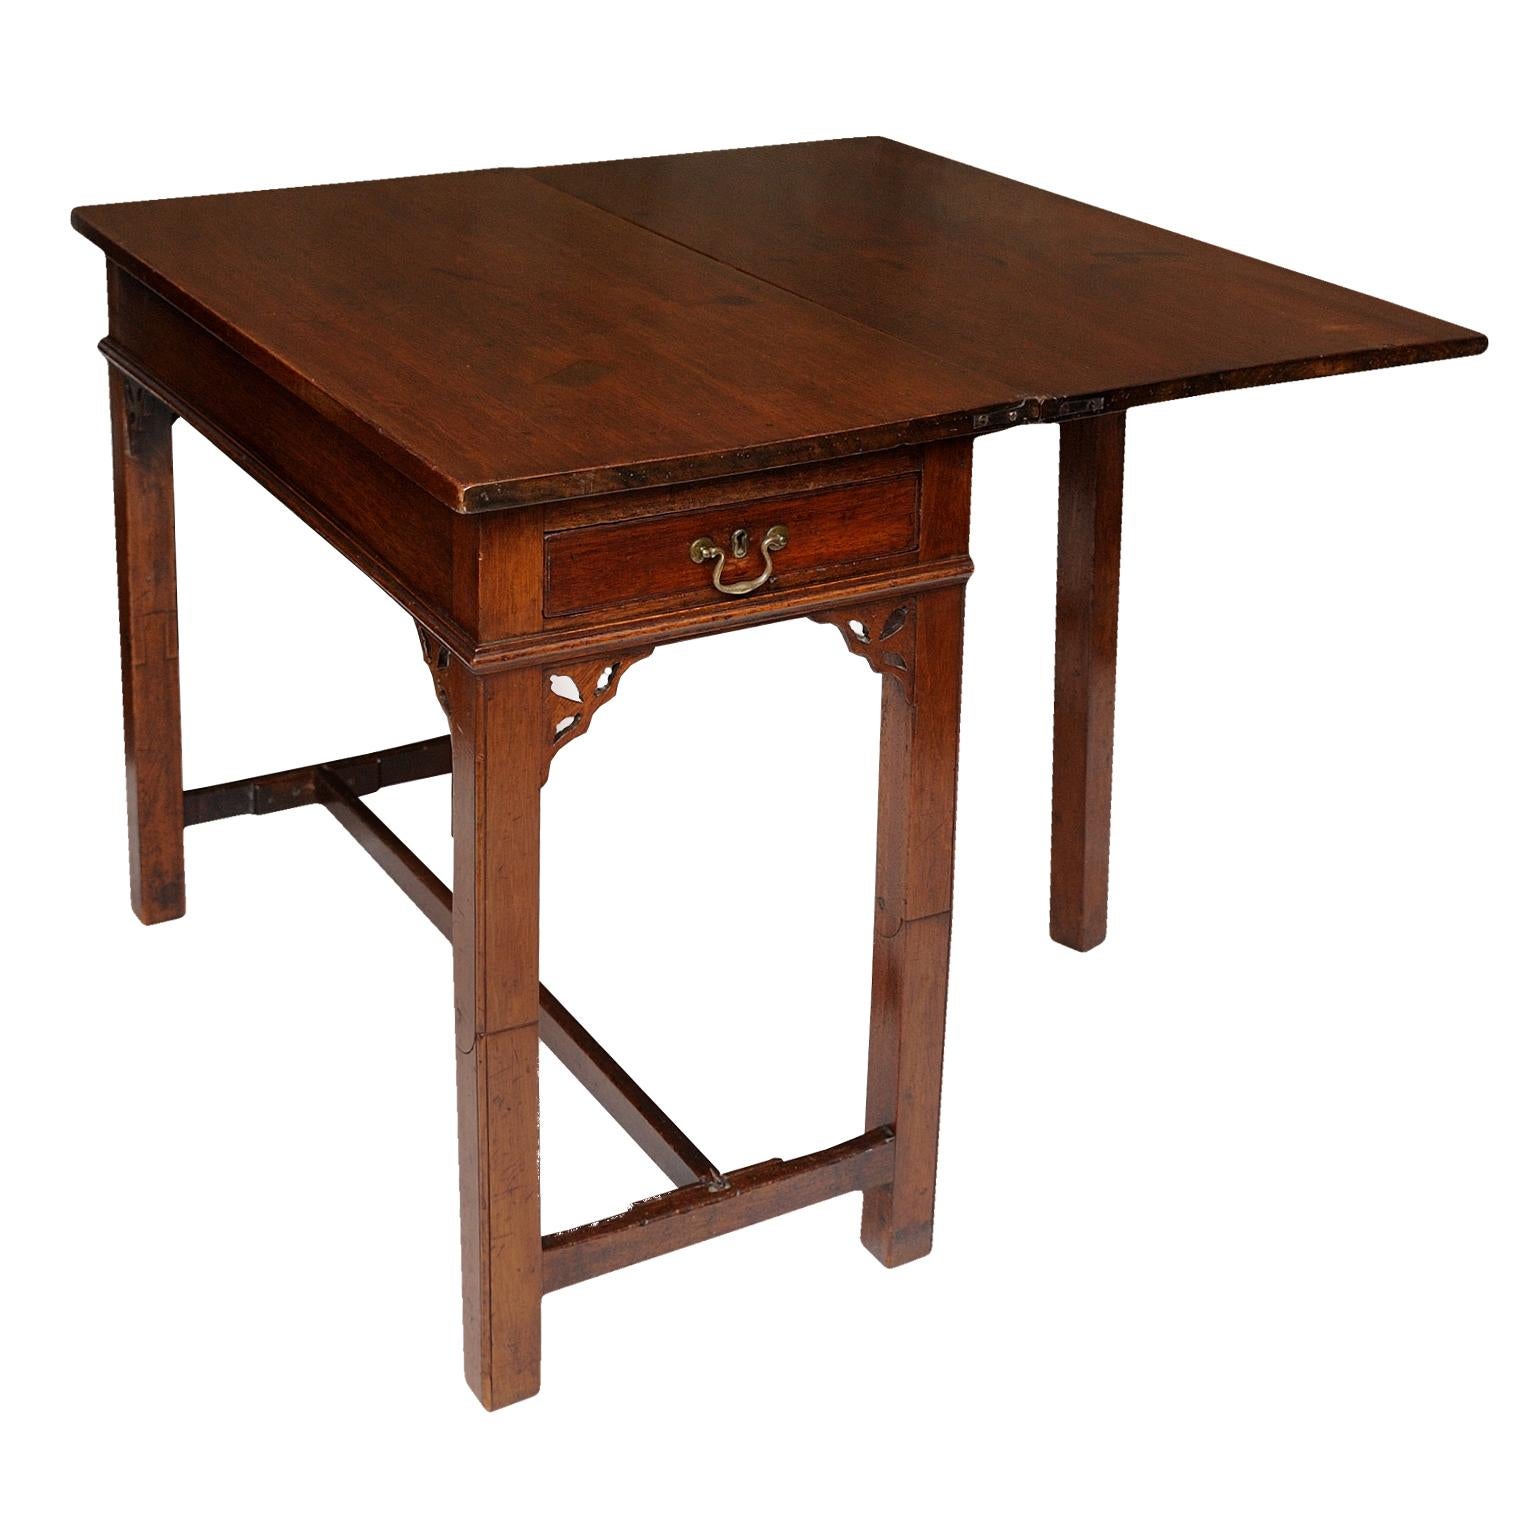 Polished Mahogany Chippendale Period Military Campaign Table, circa 1760 For Sale